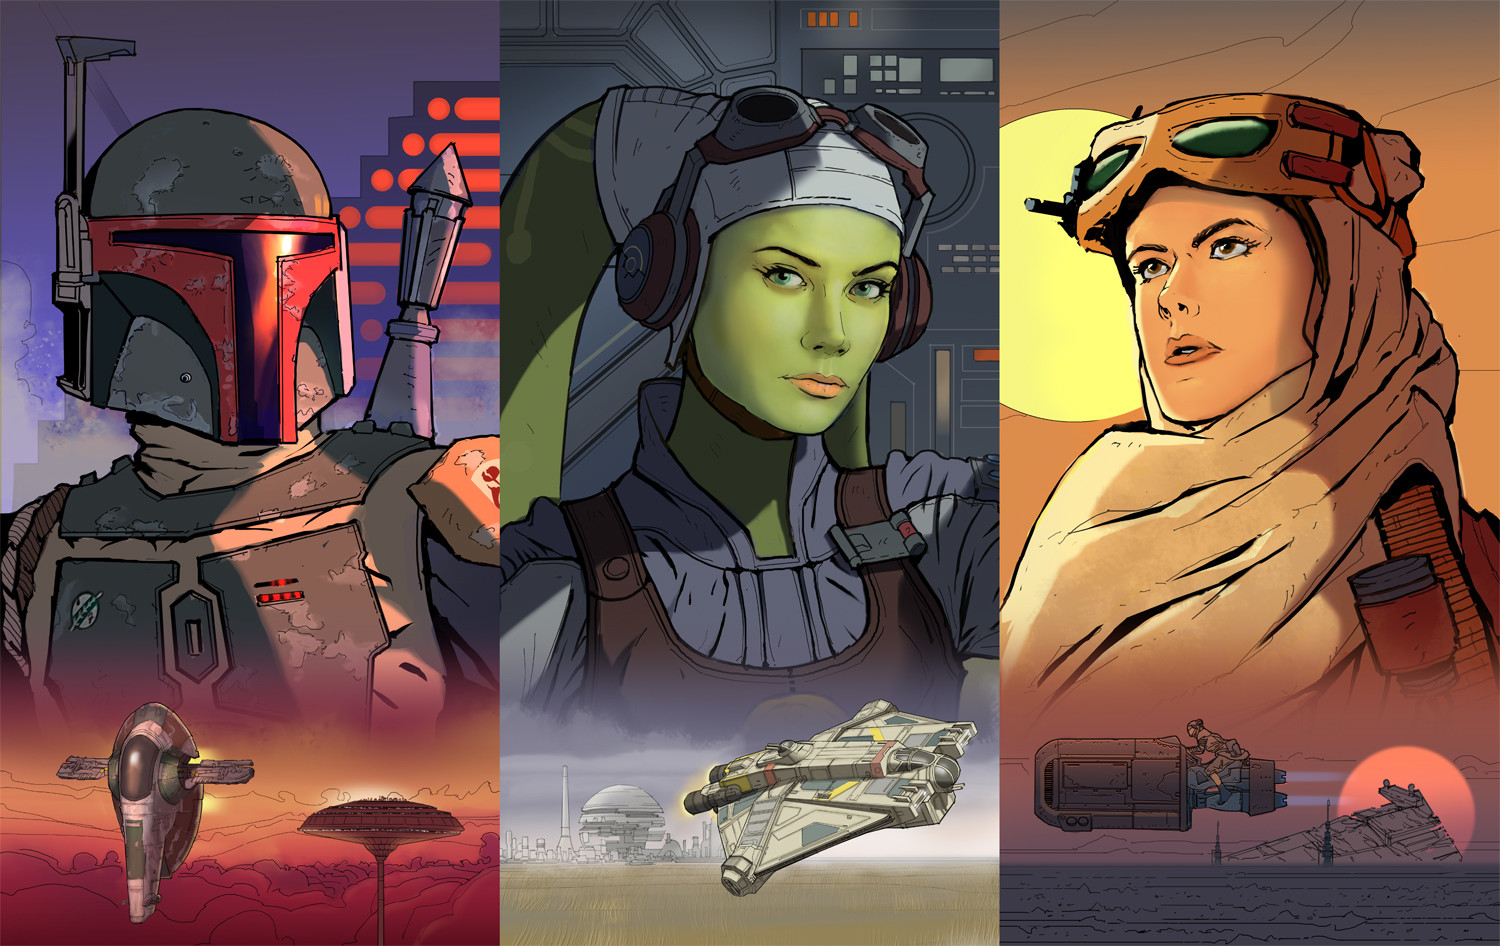 Artist Creates Whimsical Portraits Of 'Star Wars' Characters On